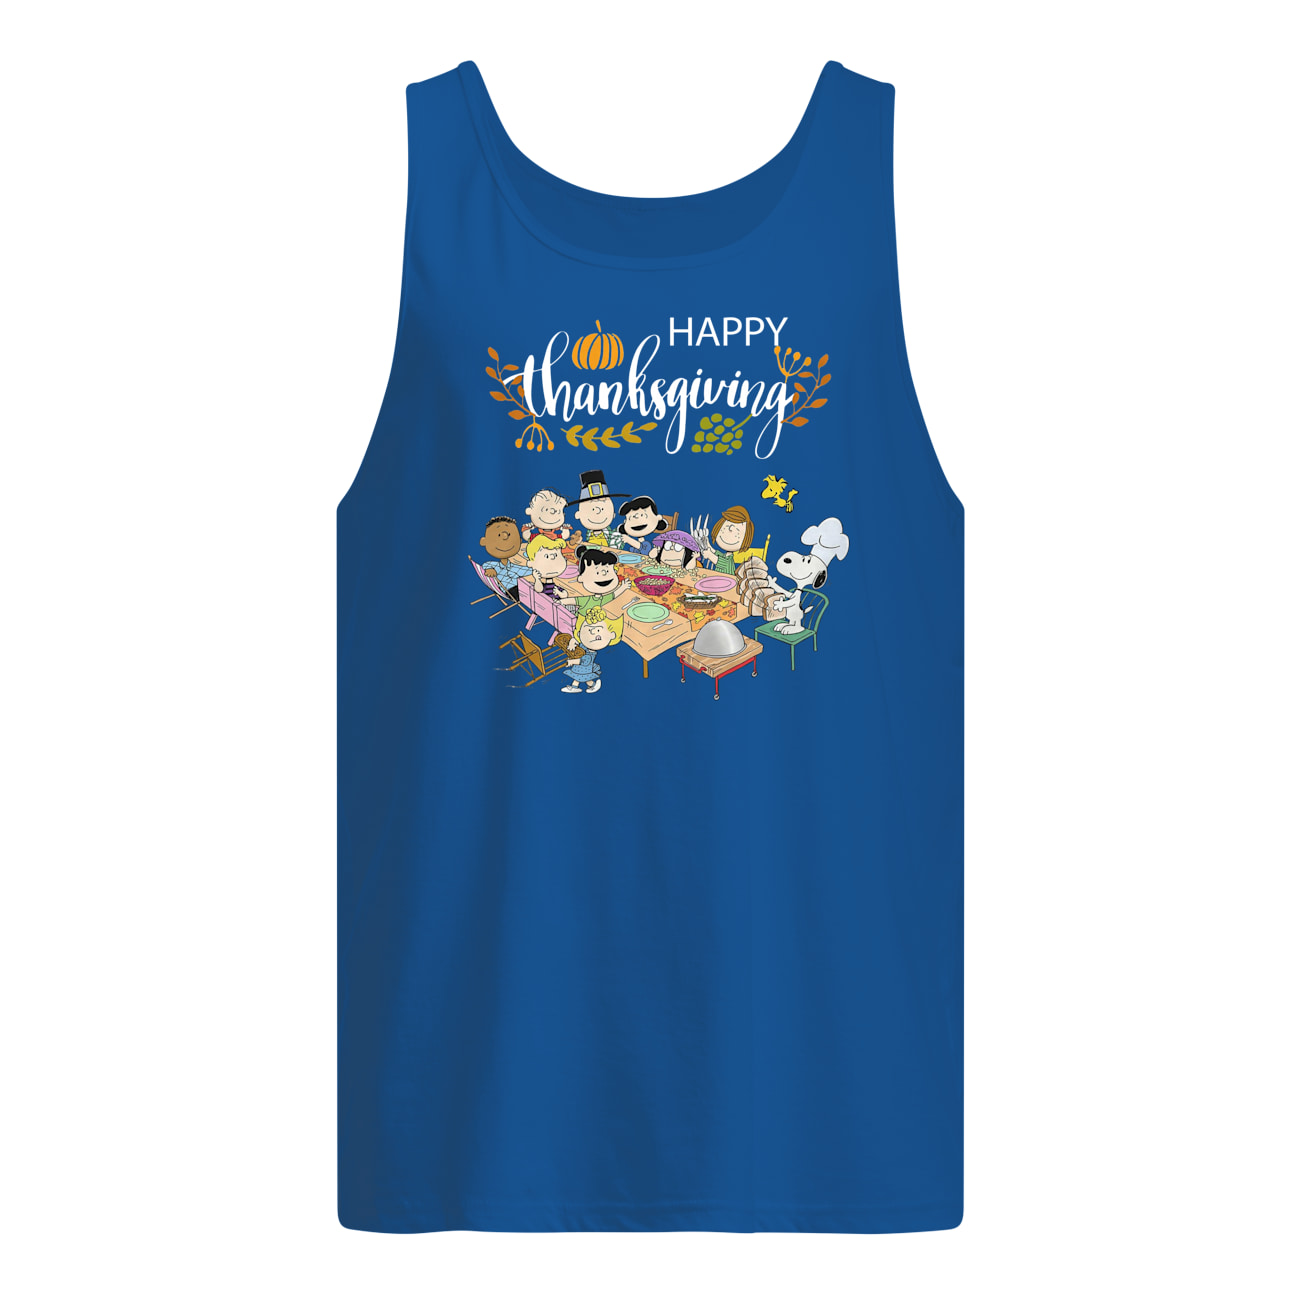 Snoopy and friends happy thanksgiving tank top